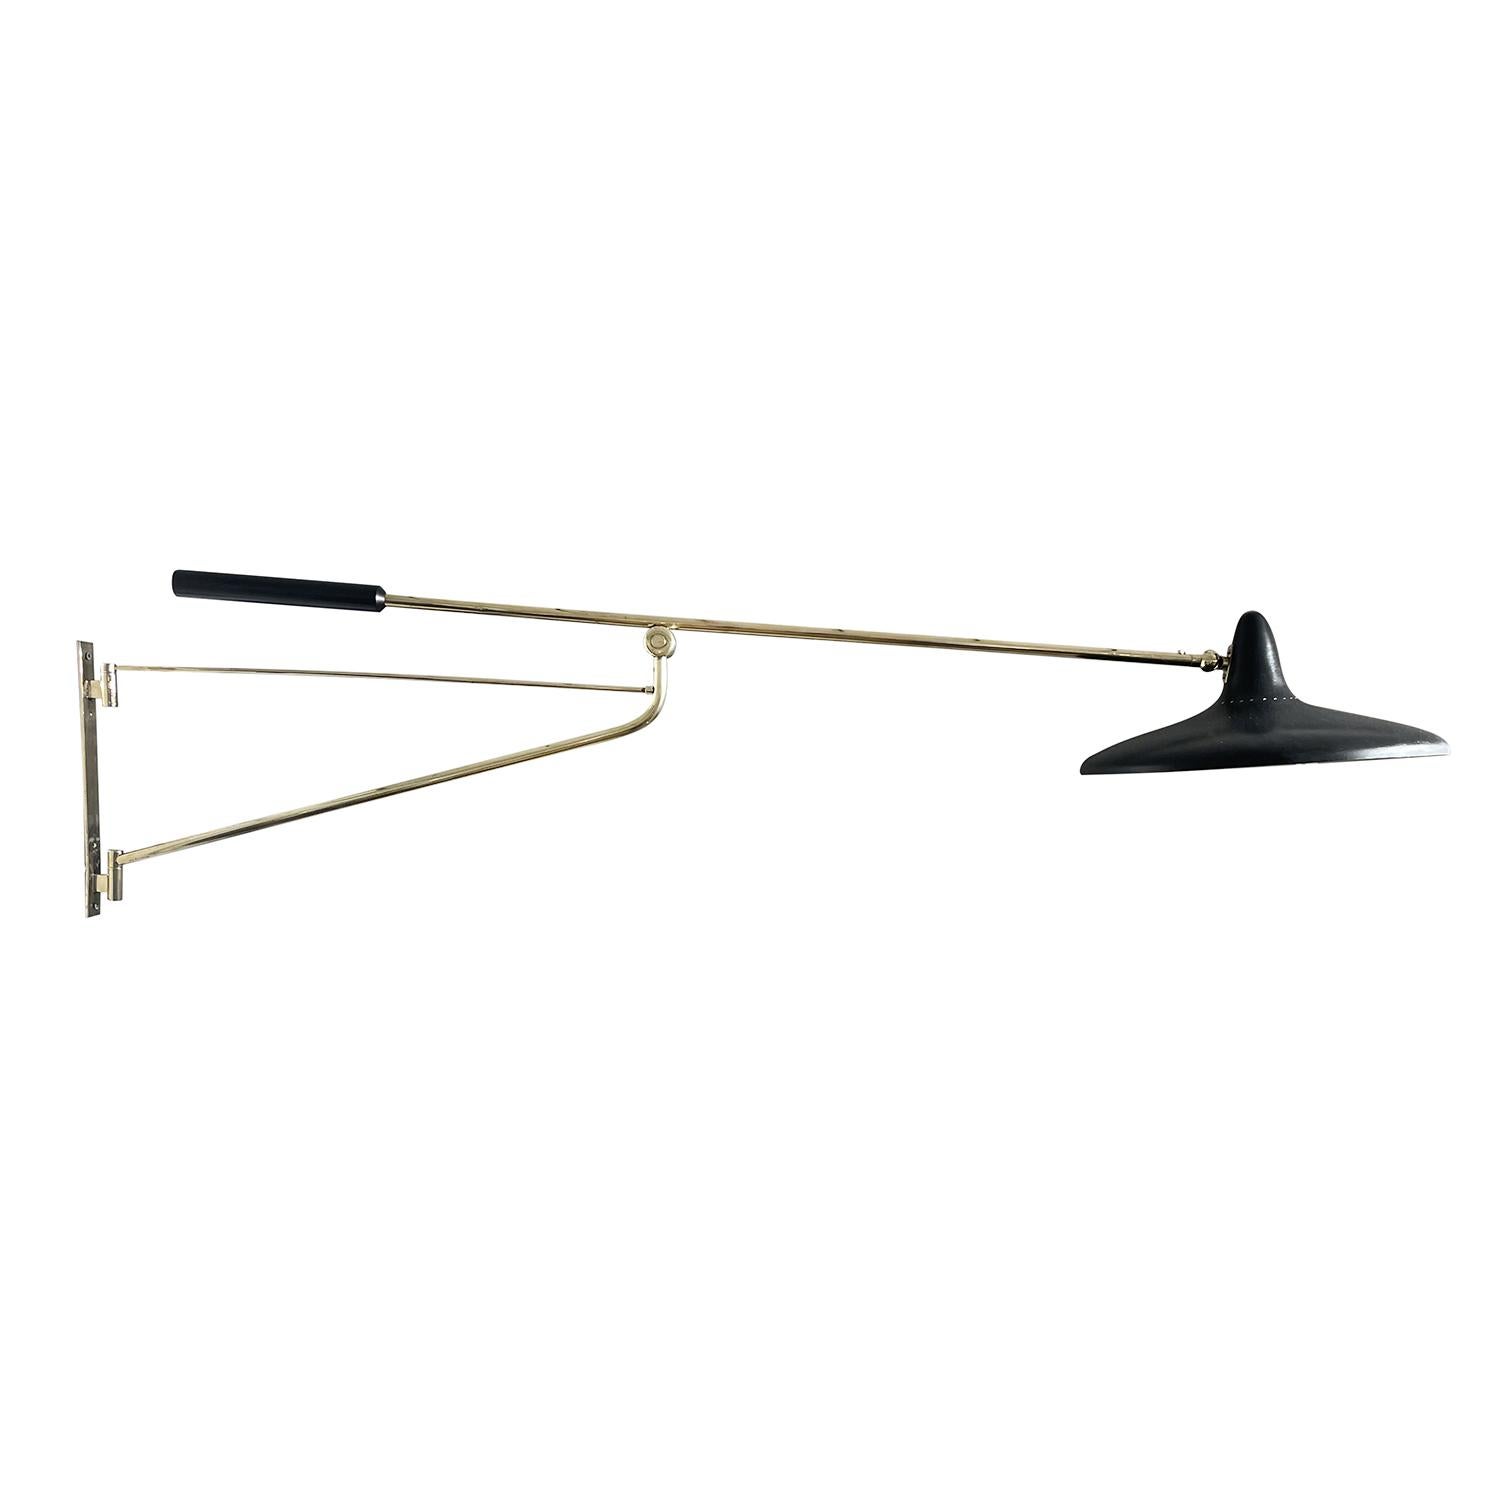 A gold-black, vintage Mid-Century Modern Italian reading wall lamp, light made of handcrafted polished brass, designed and produced by Stilnovo in good condition. The round lacquered aluminum shade is supported by a flexible stem, beam halted by two